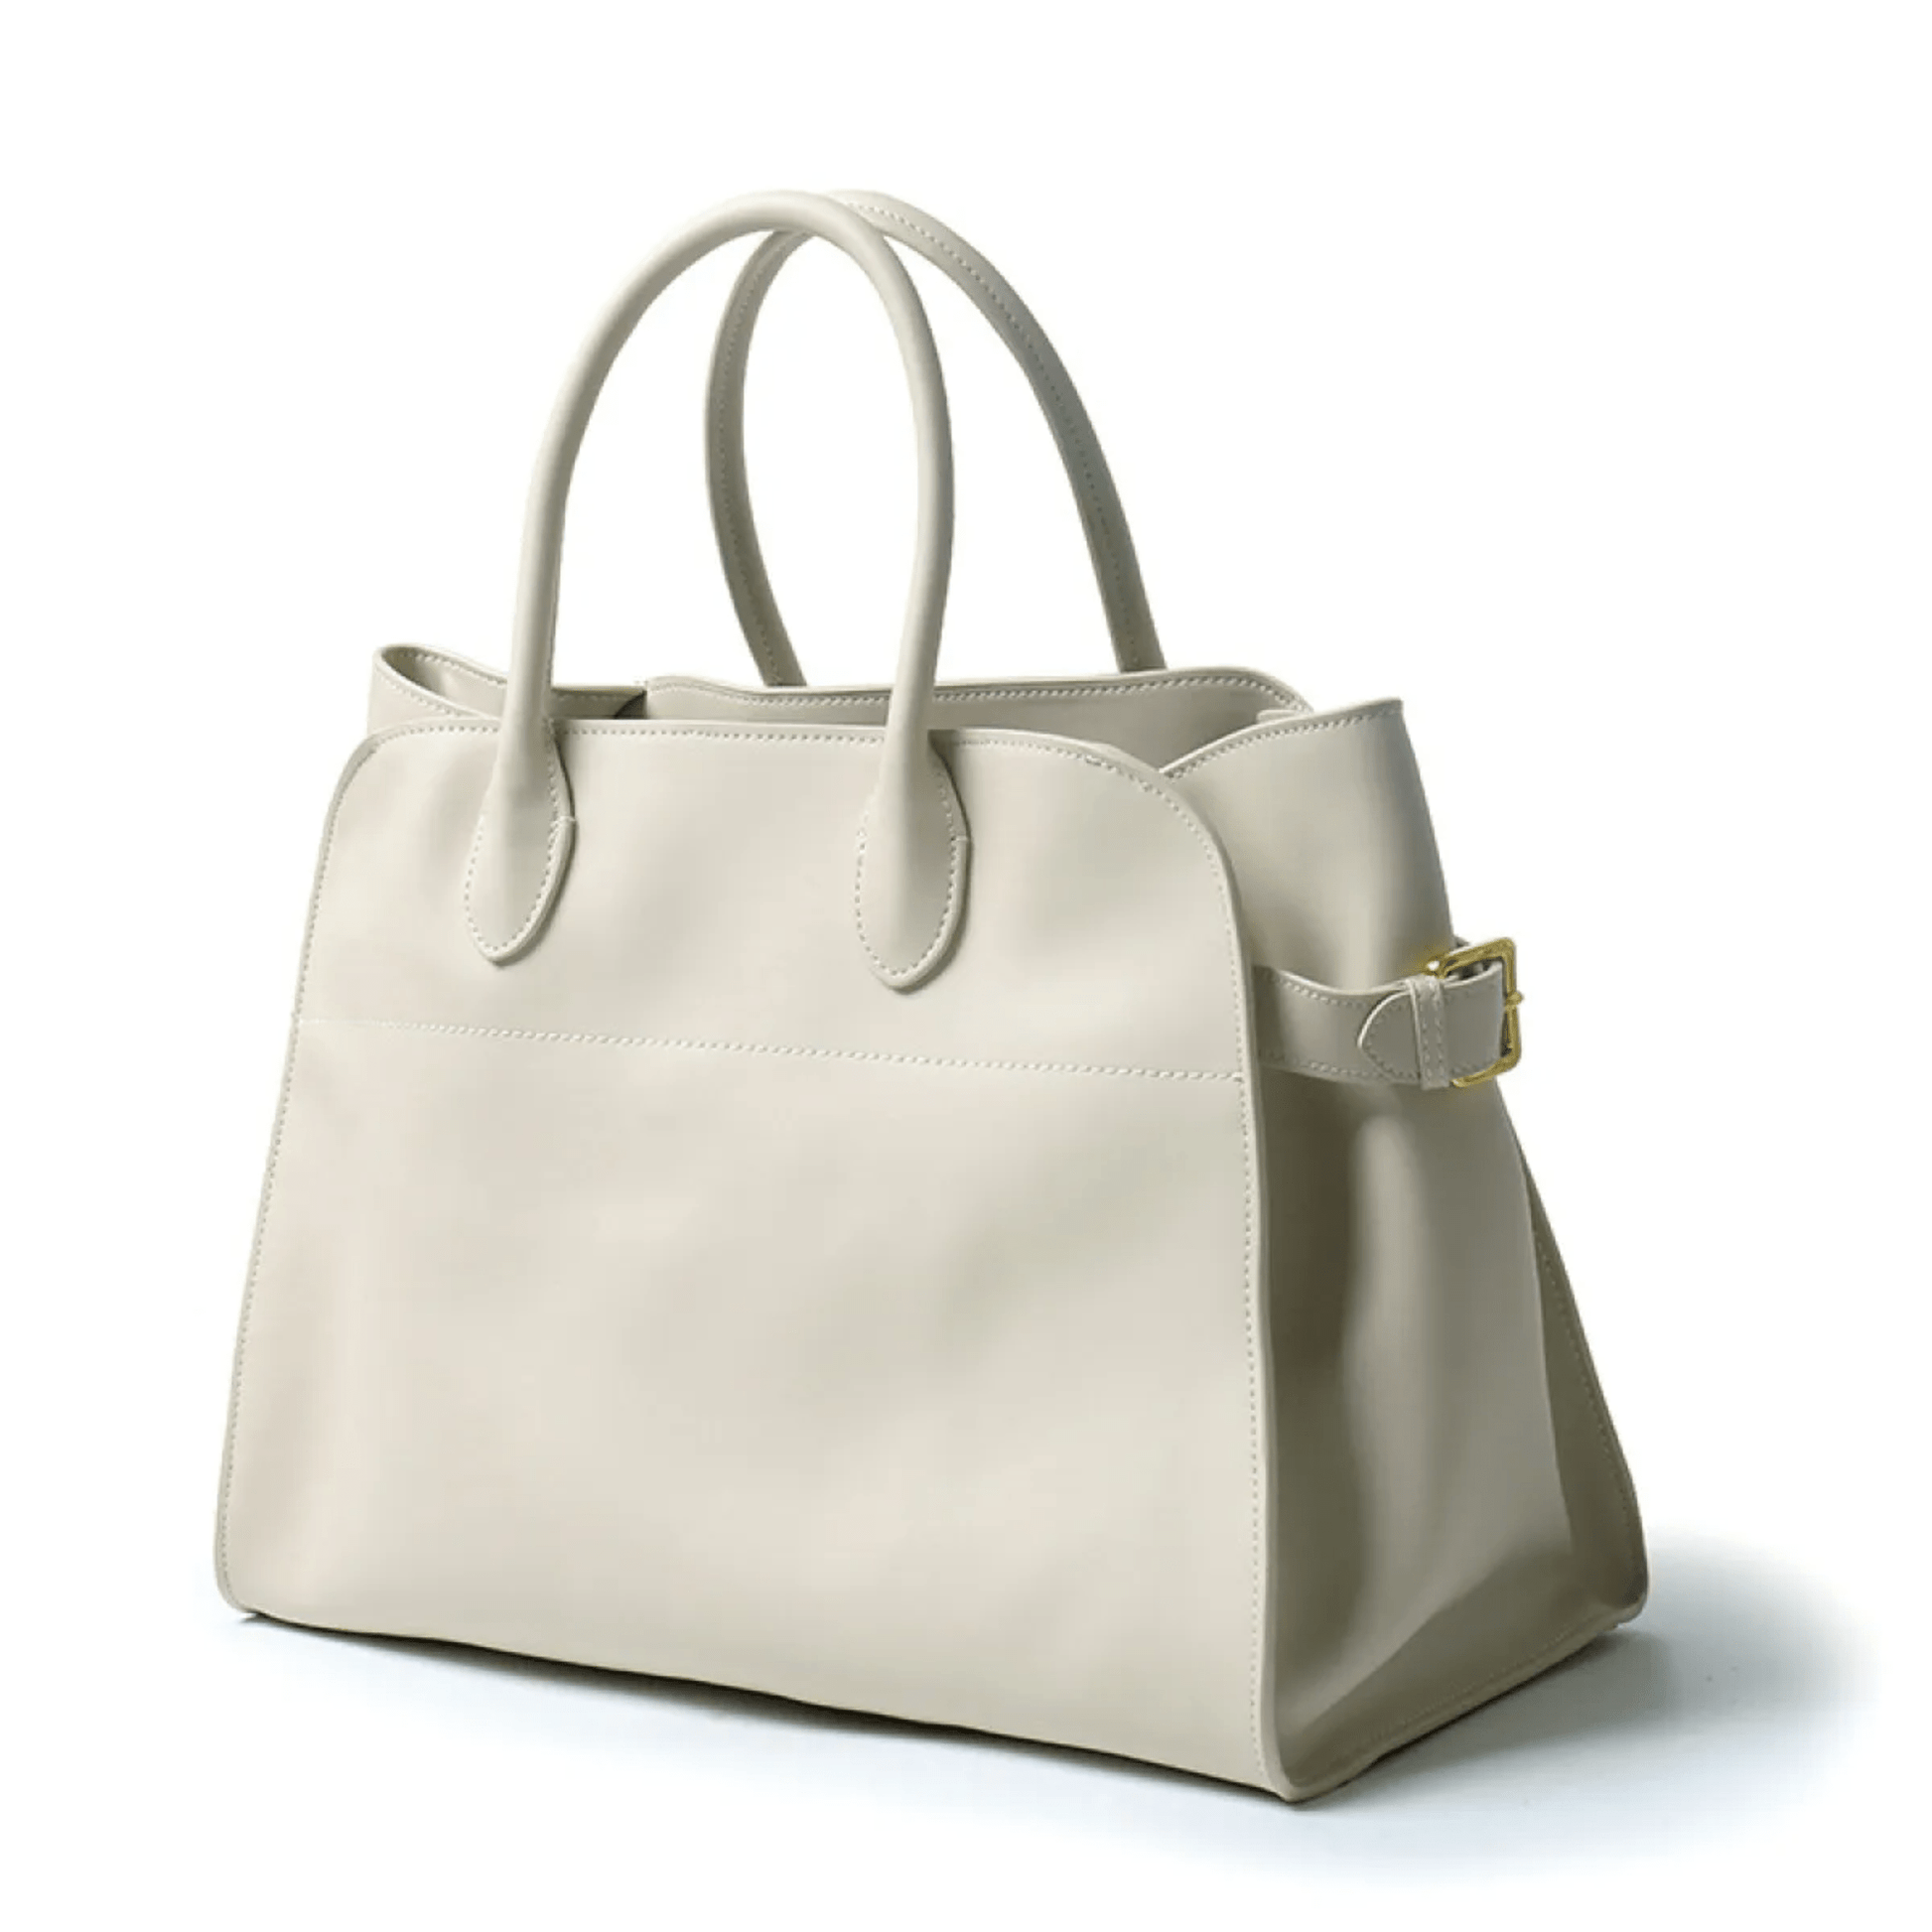 The "Row-Margaux-inspired" Luxurious Leather Tote Bag - Trendiesty Worldwide